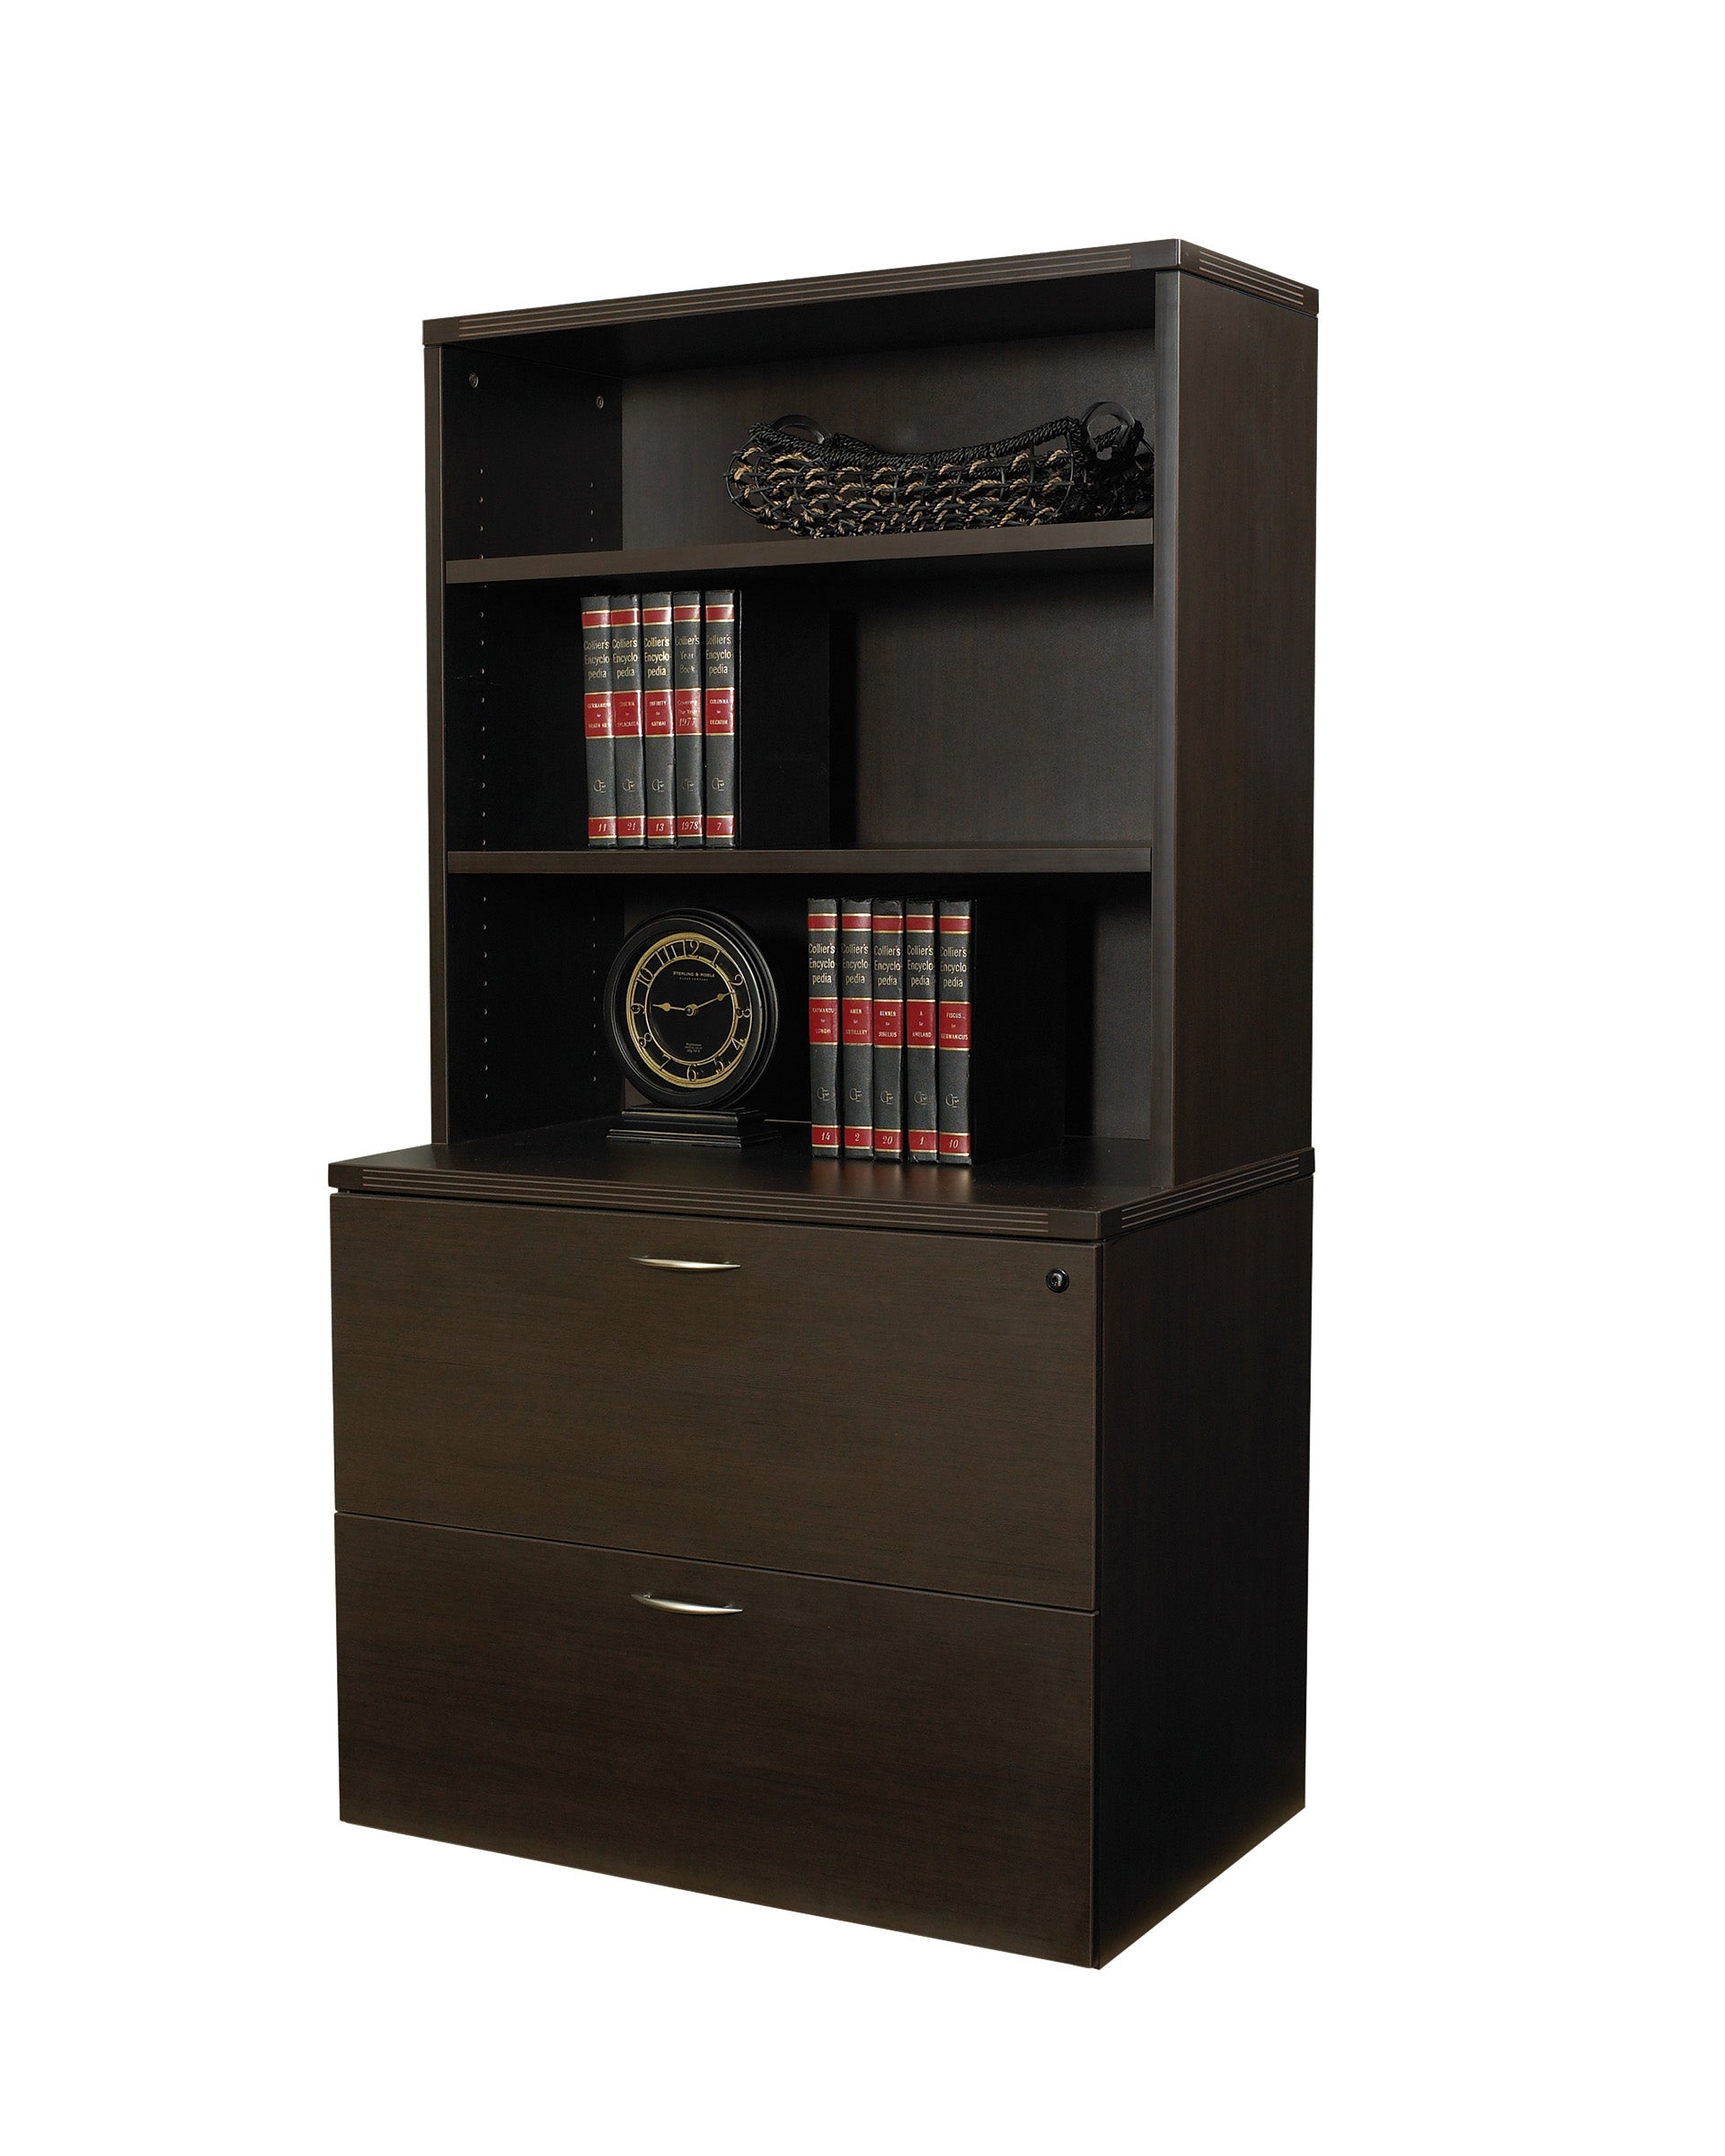 NAP-1253 - Napa Two Drawer Lateral File with Open Hutch/Bookcase by OSP